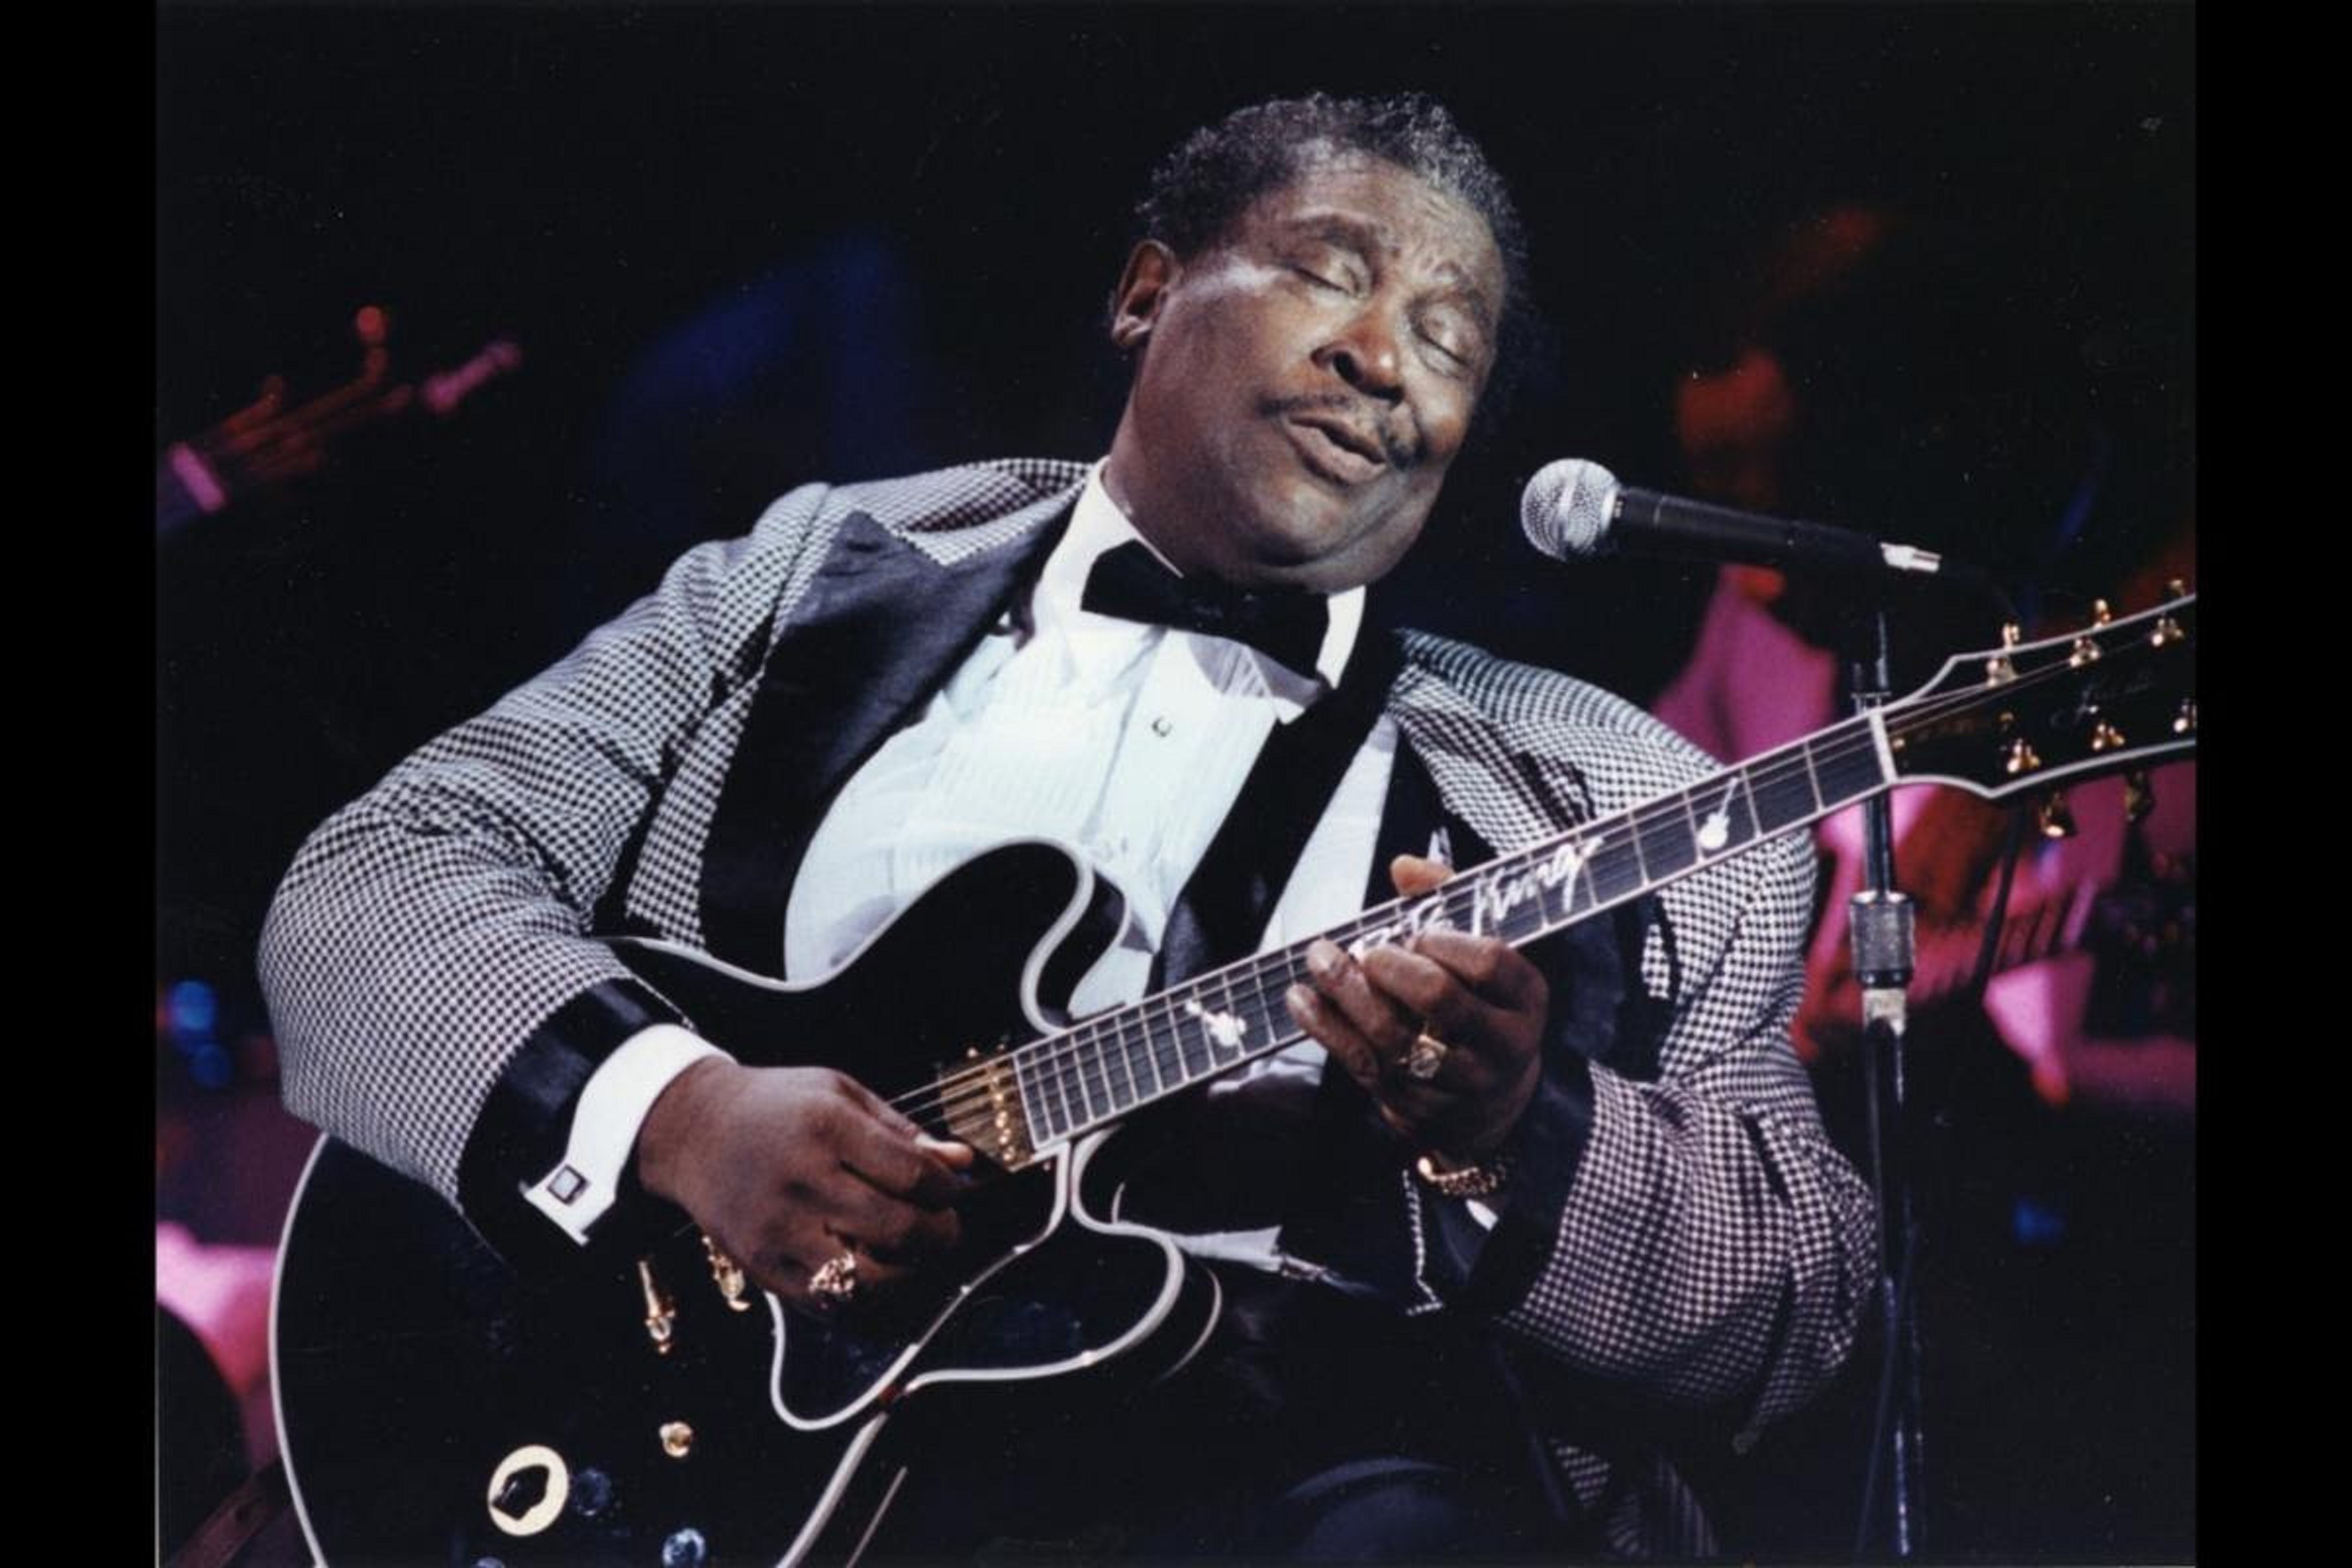 Gibson: ‘B.B. King Lucille Legacy’ Available Worldwide on Gibson.com